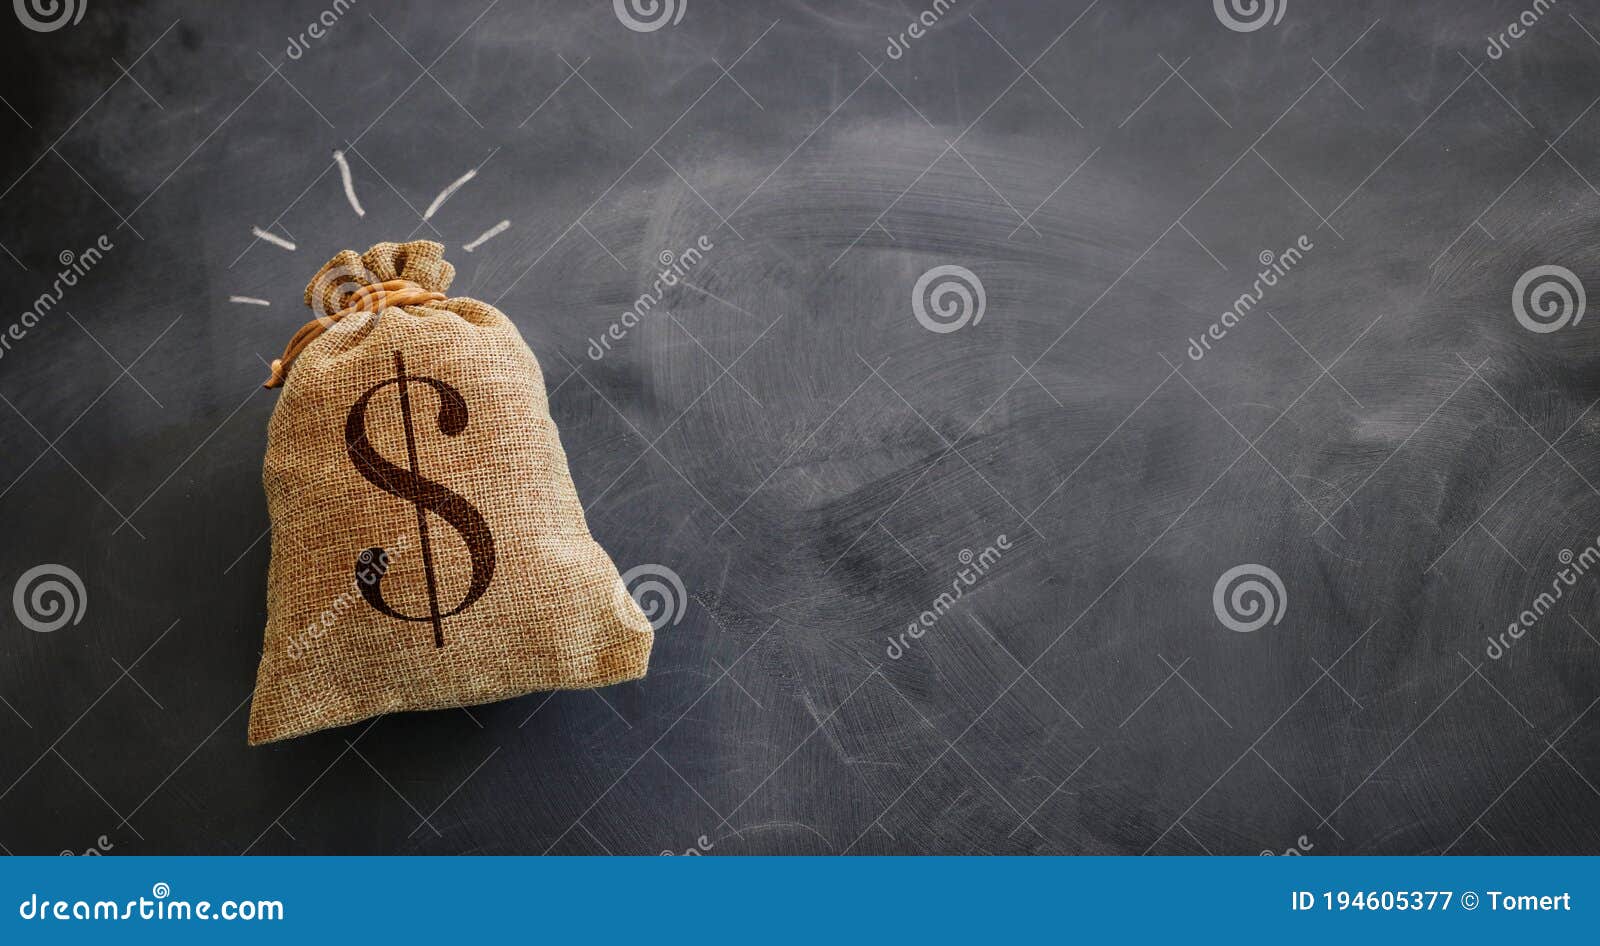 business concept of success, best investment and reward for performance. money bag with dollar sign